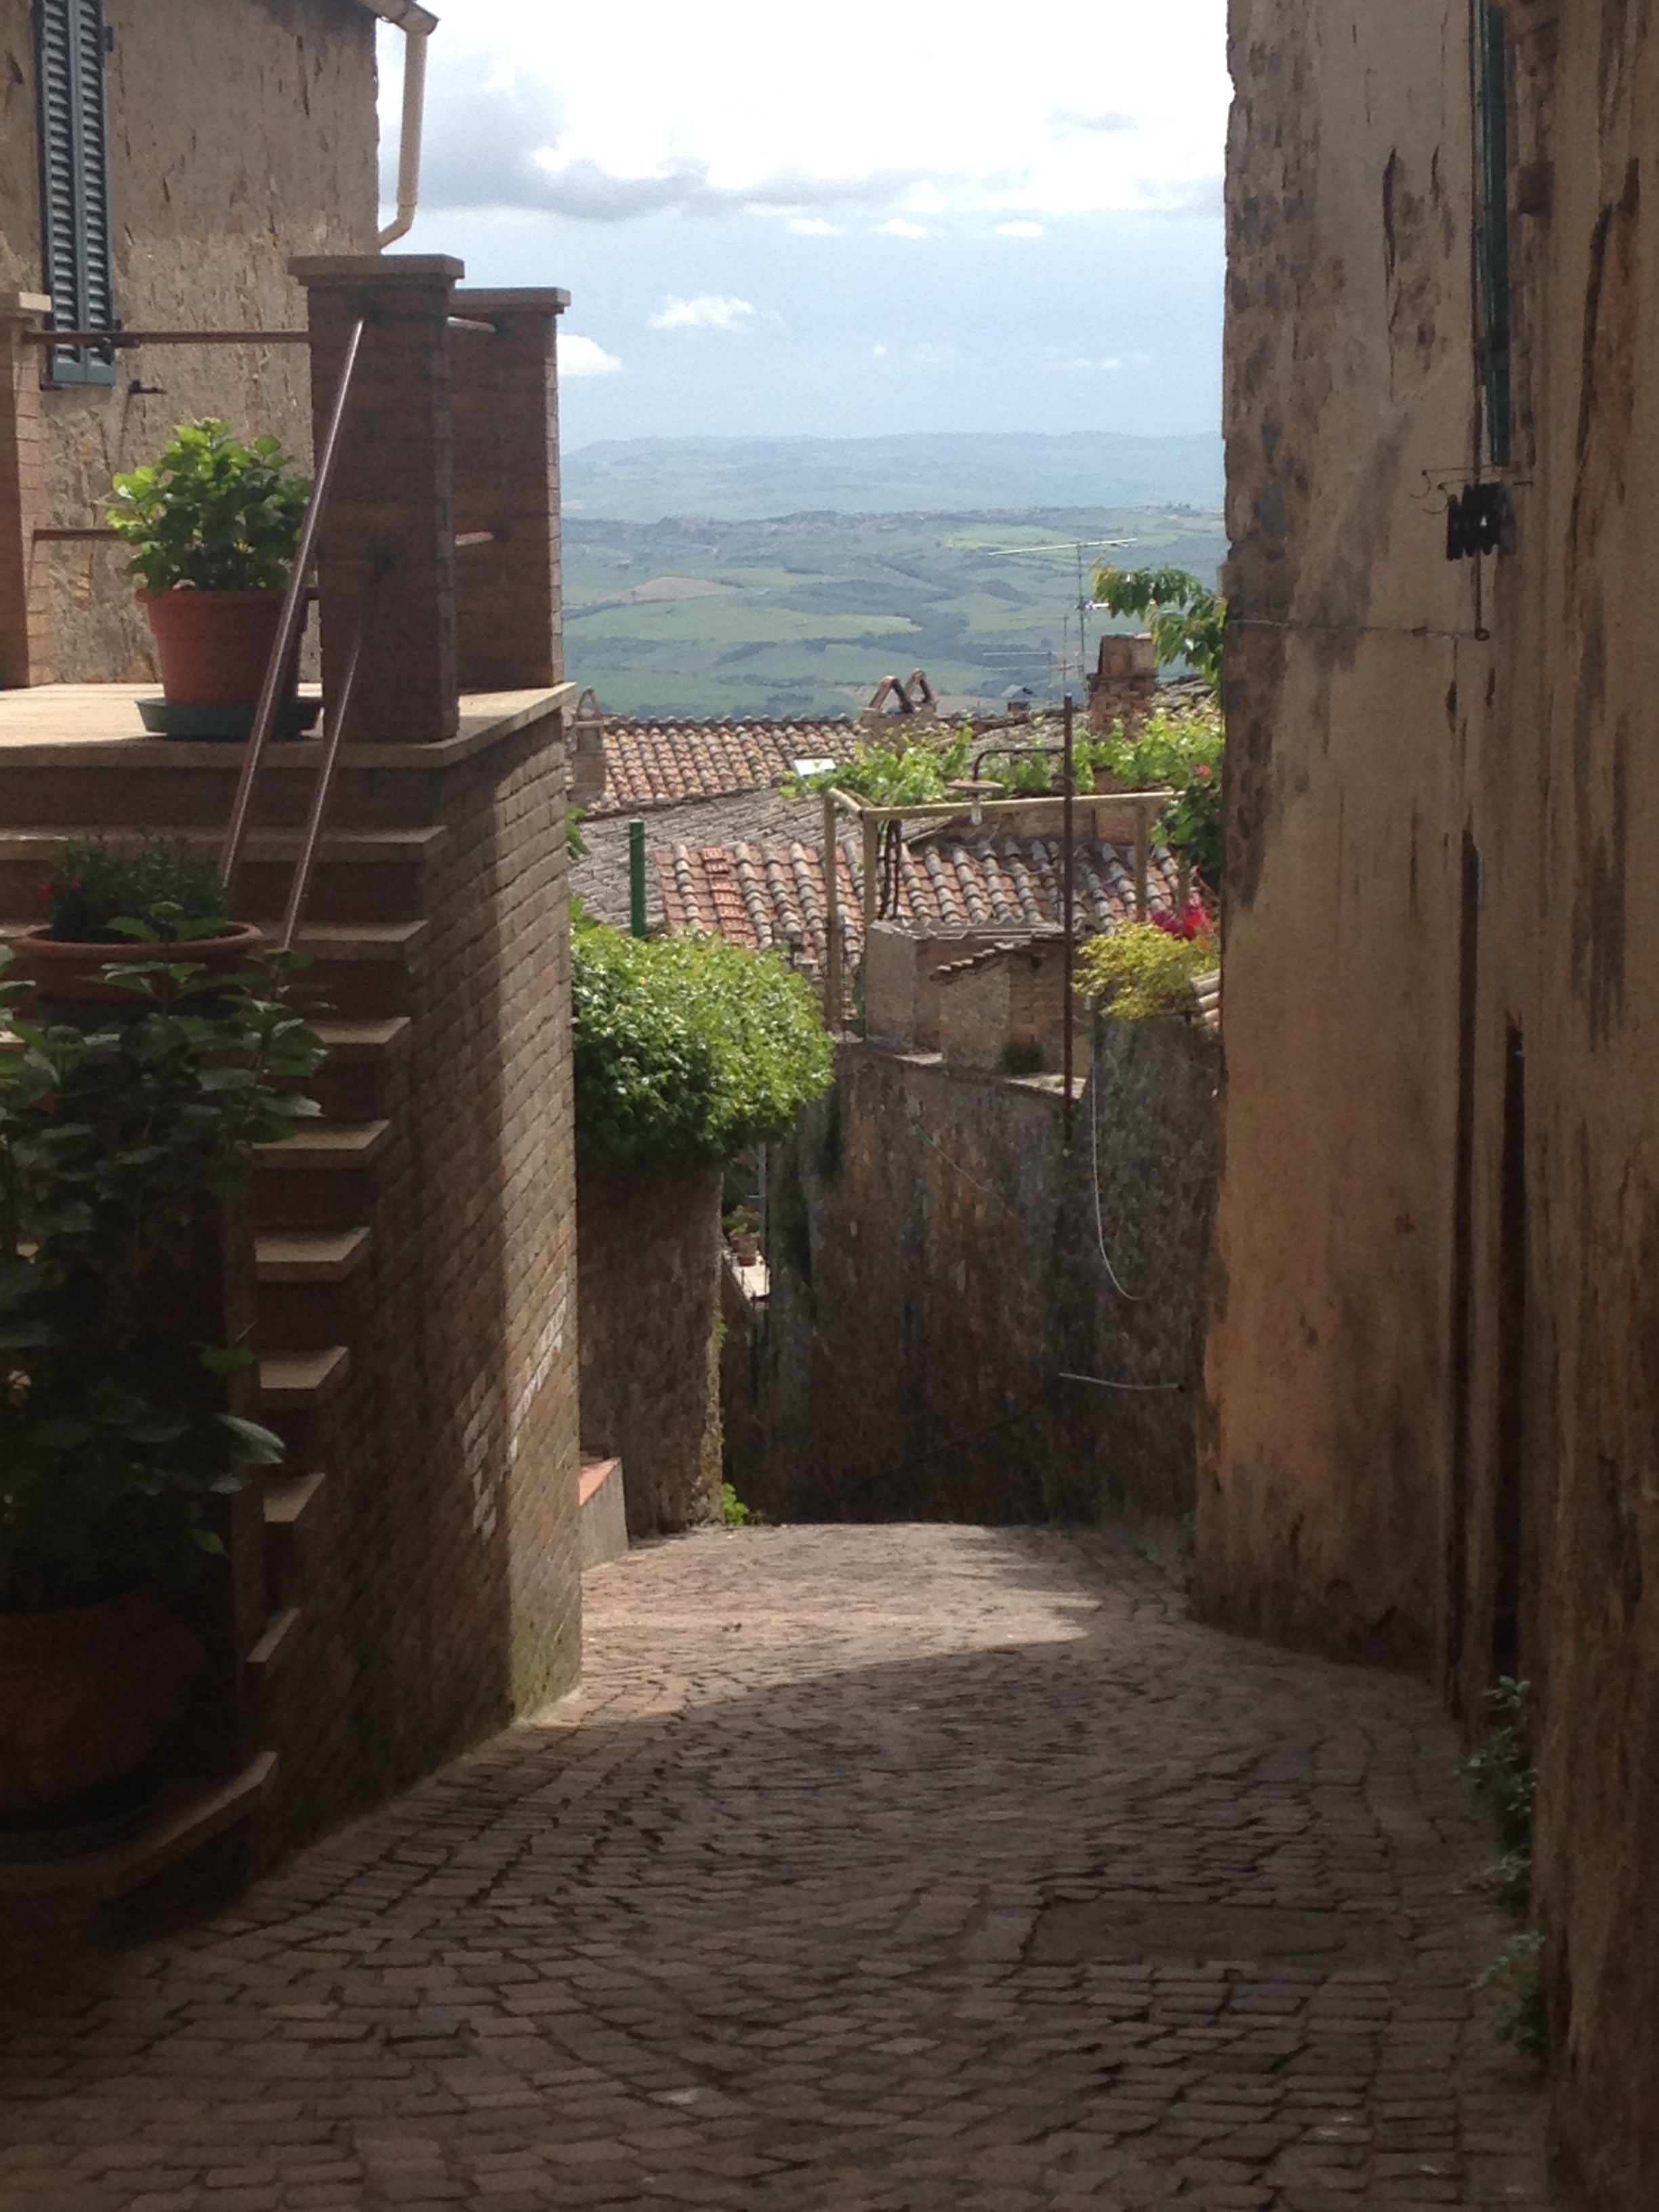 View in Montalcino